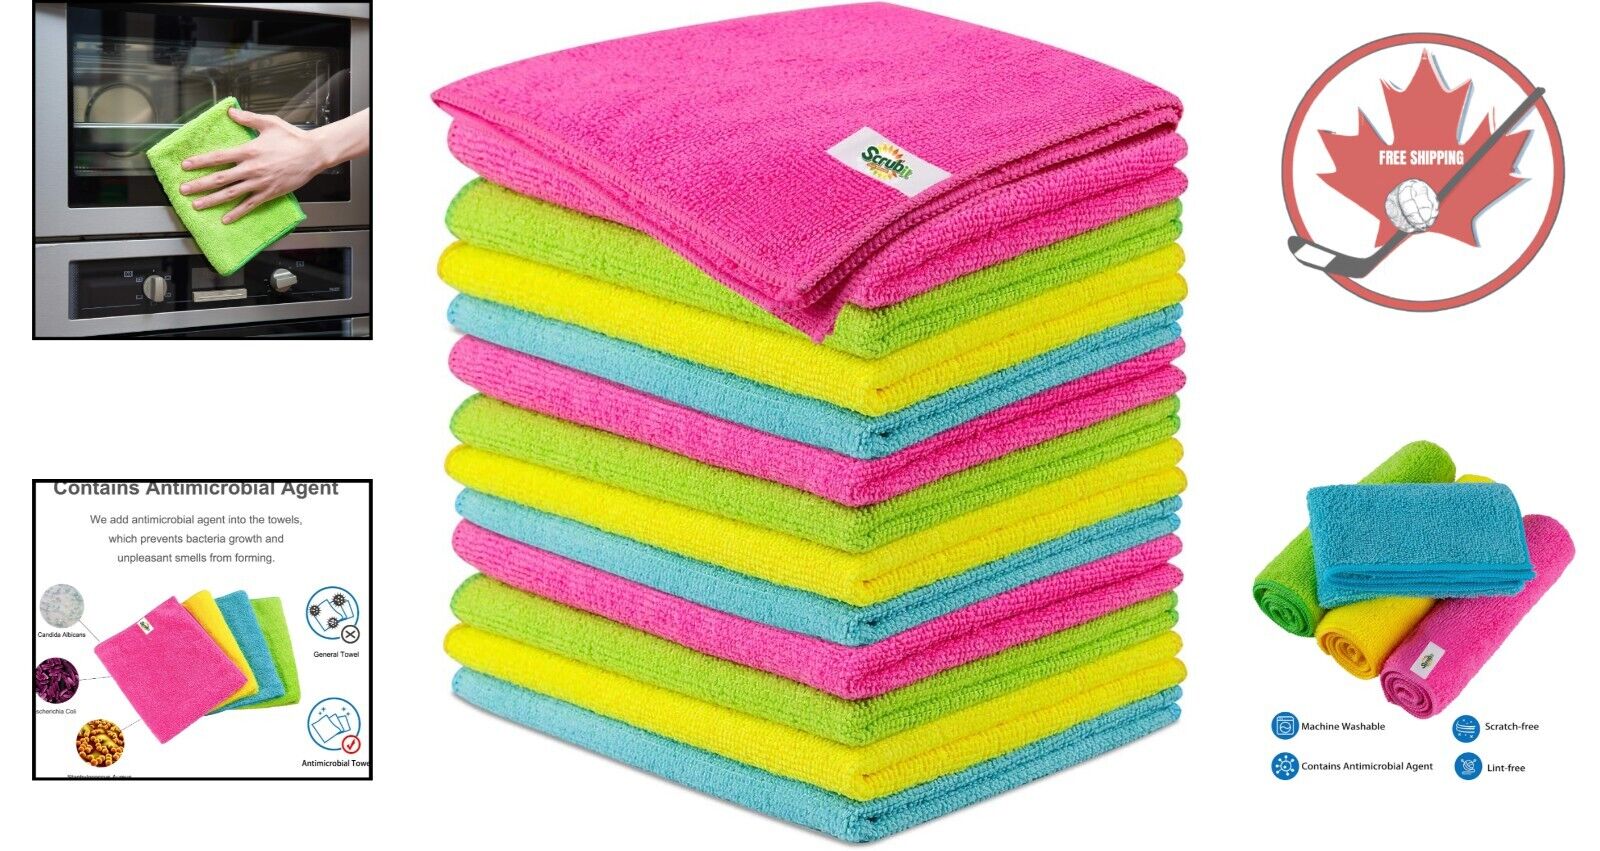 Microfiber Cleaning Cloth - Lint Free, Ultra Absorbent, Super Soft - 12 Pack